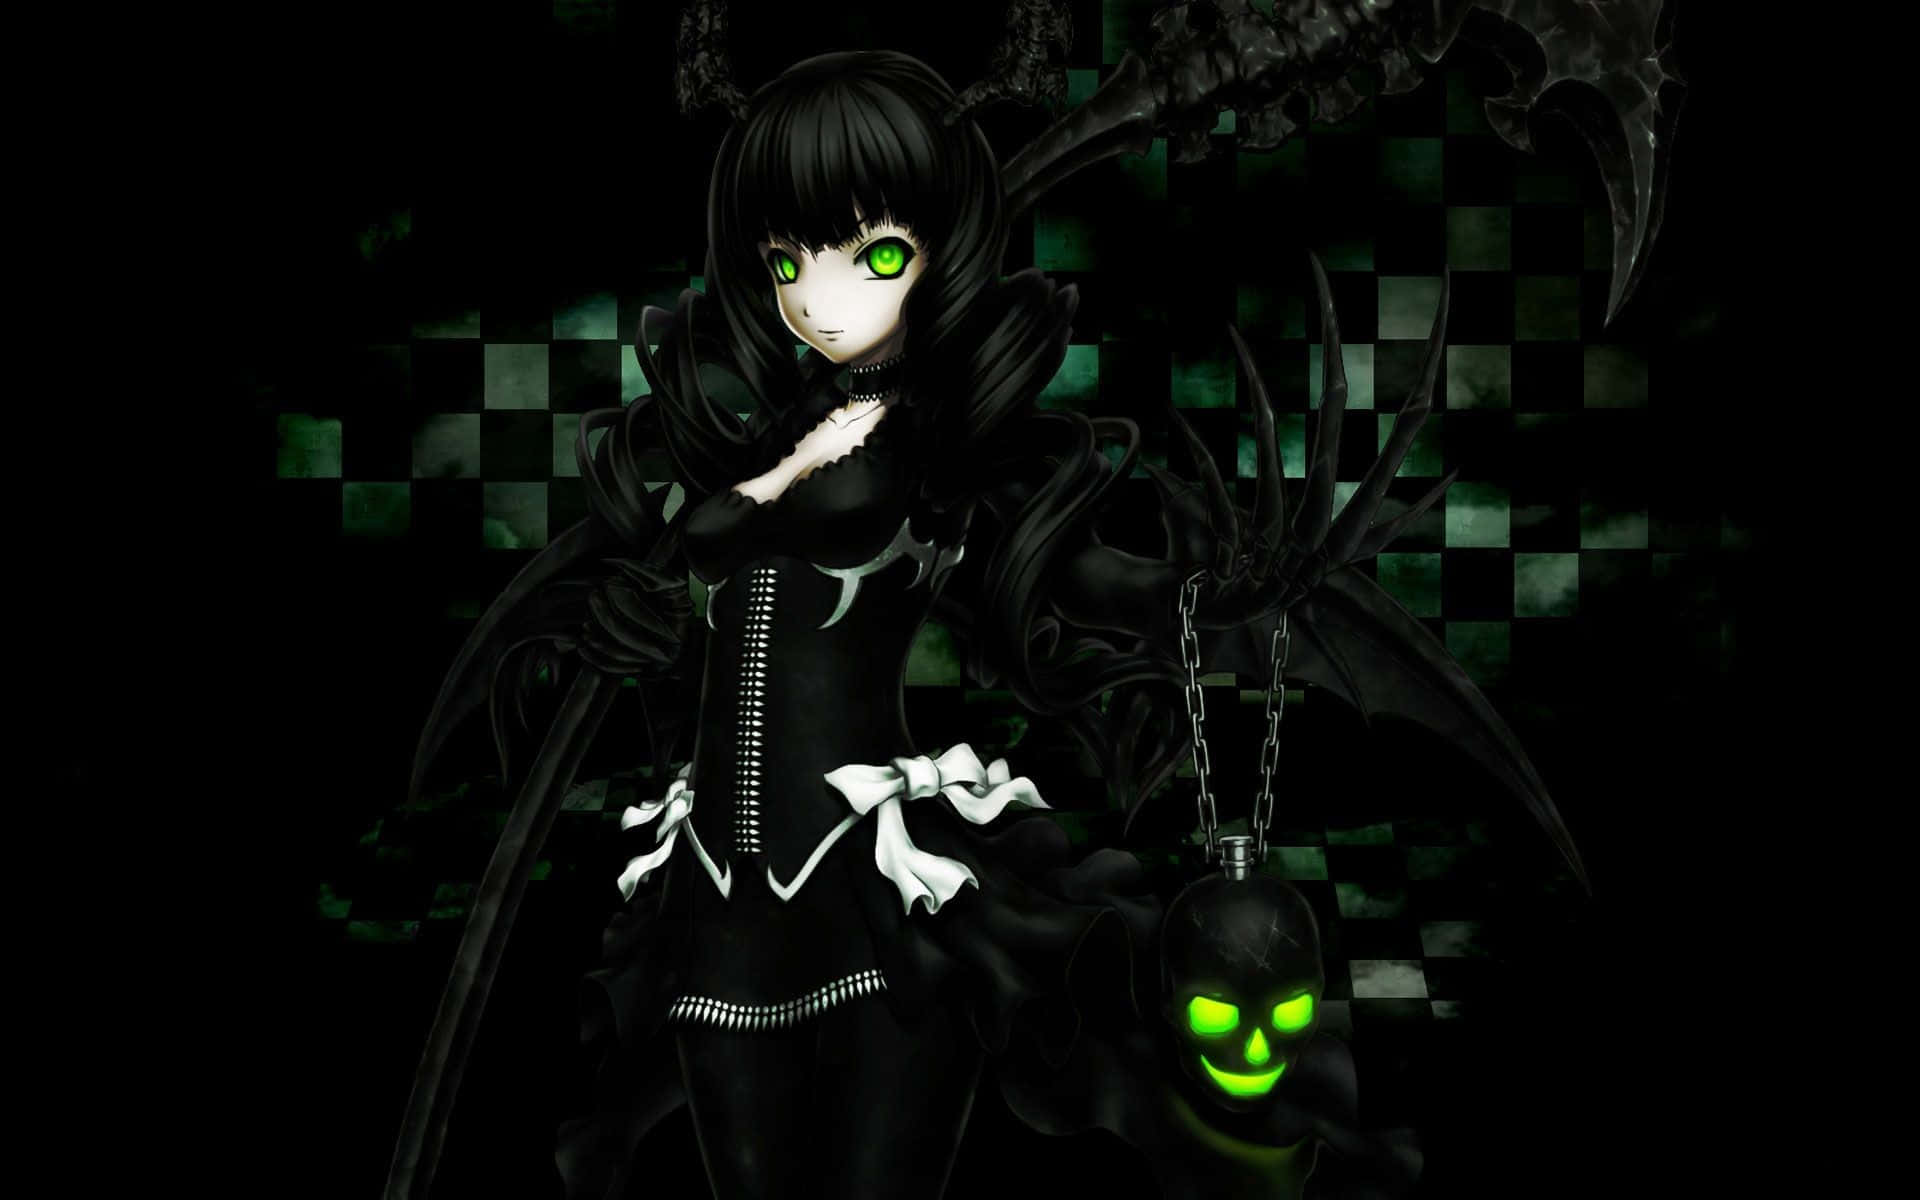 A Girl In Black And Green With A Skeleton